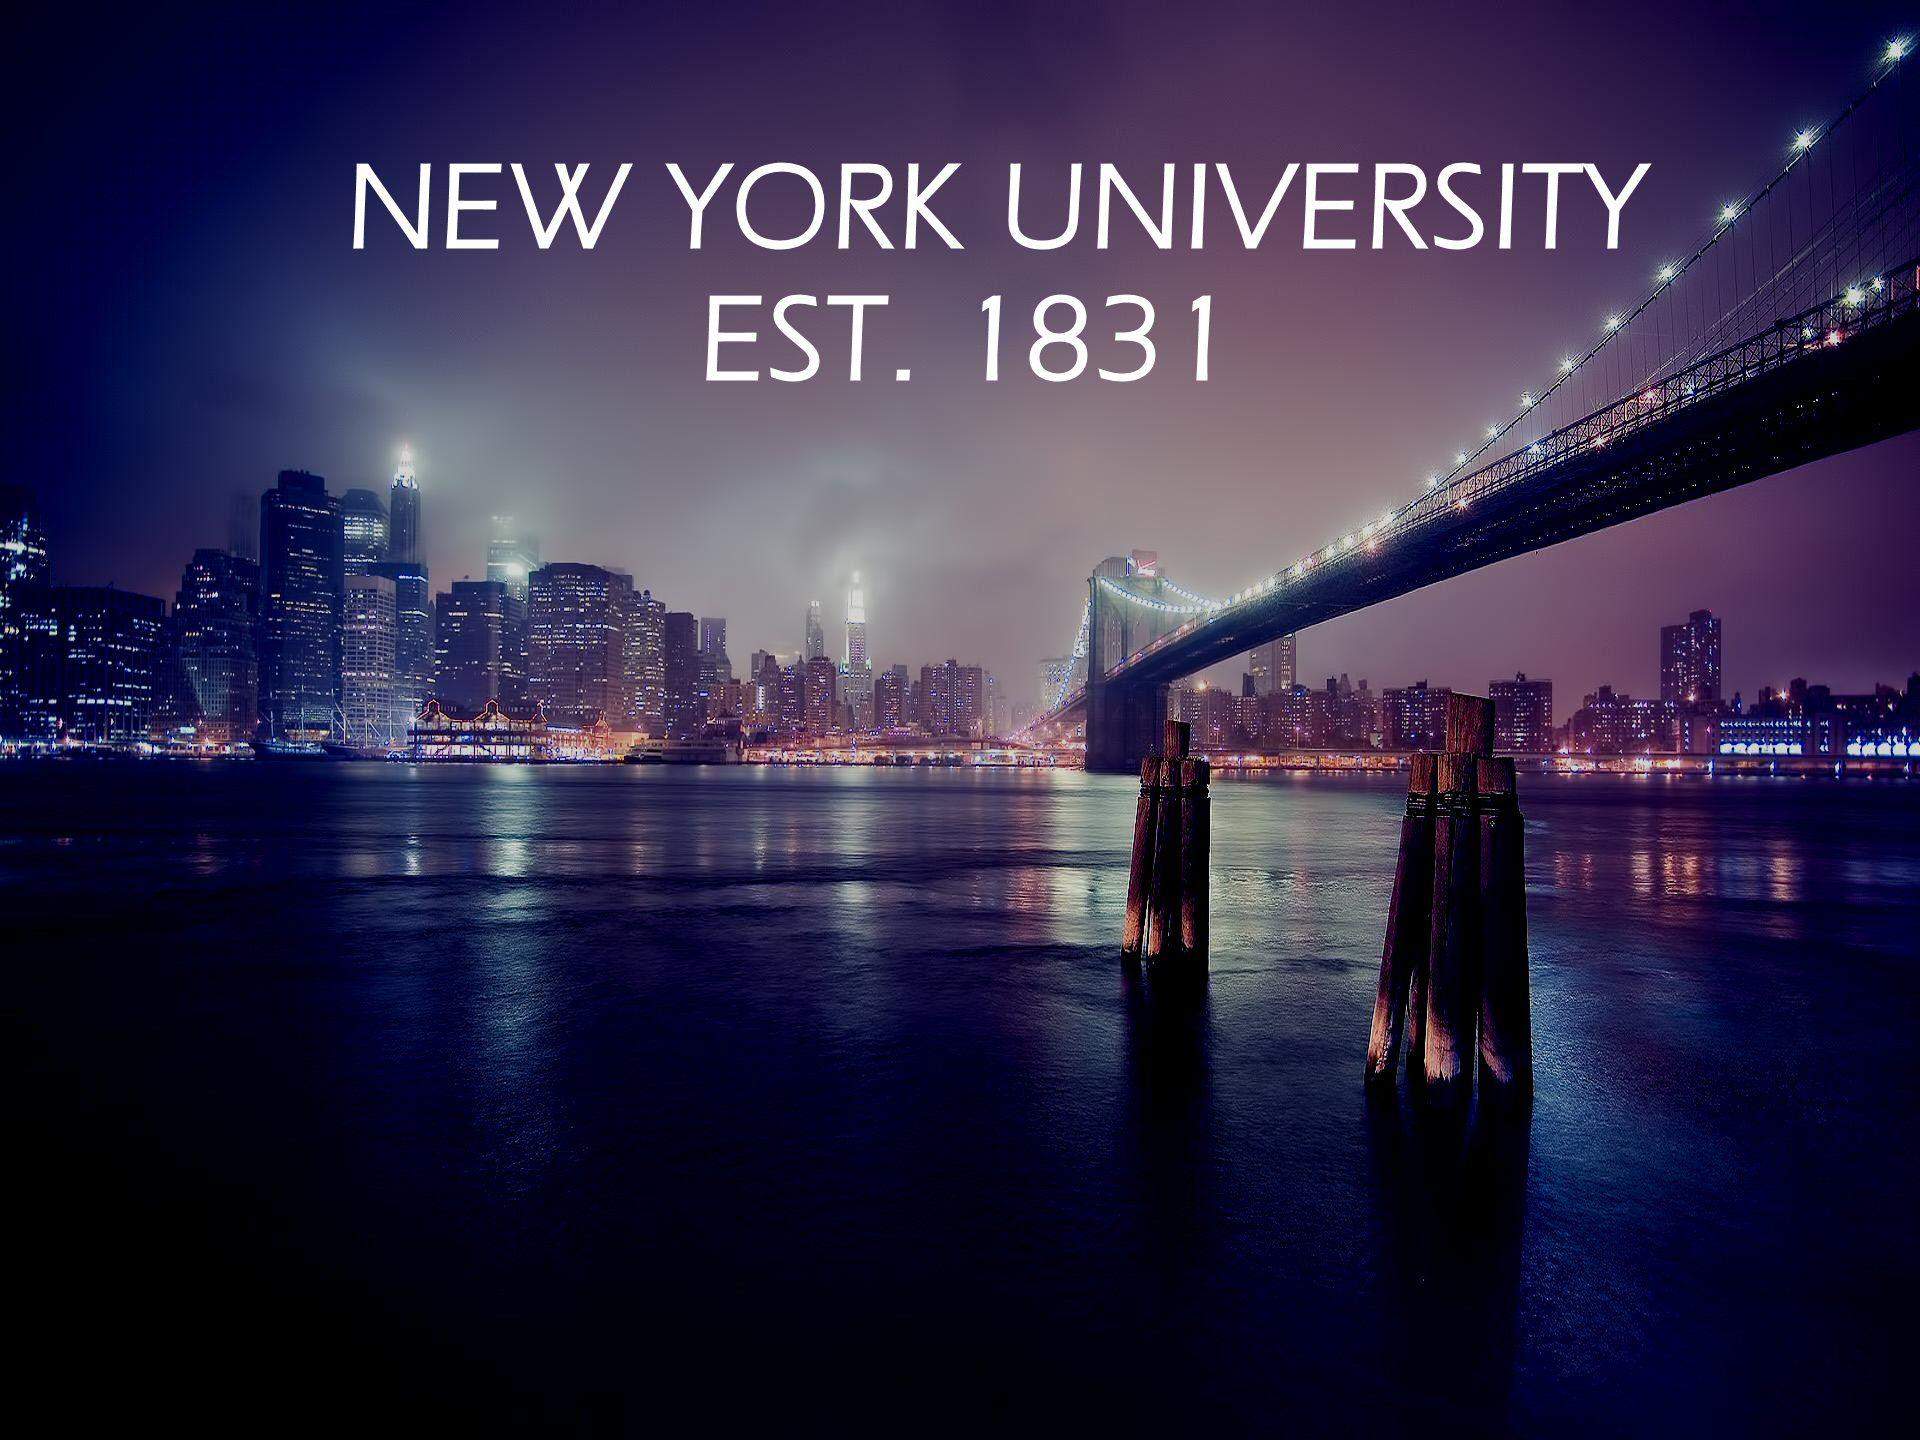 NYU, pursuing excellence since 1831